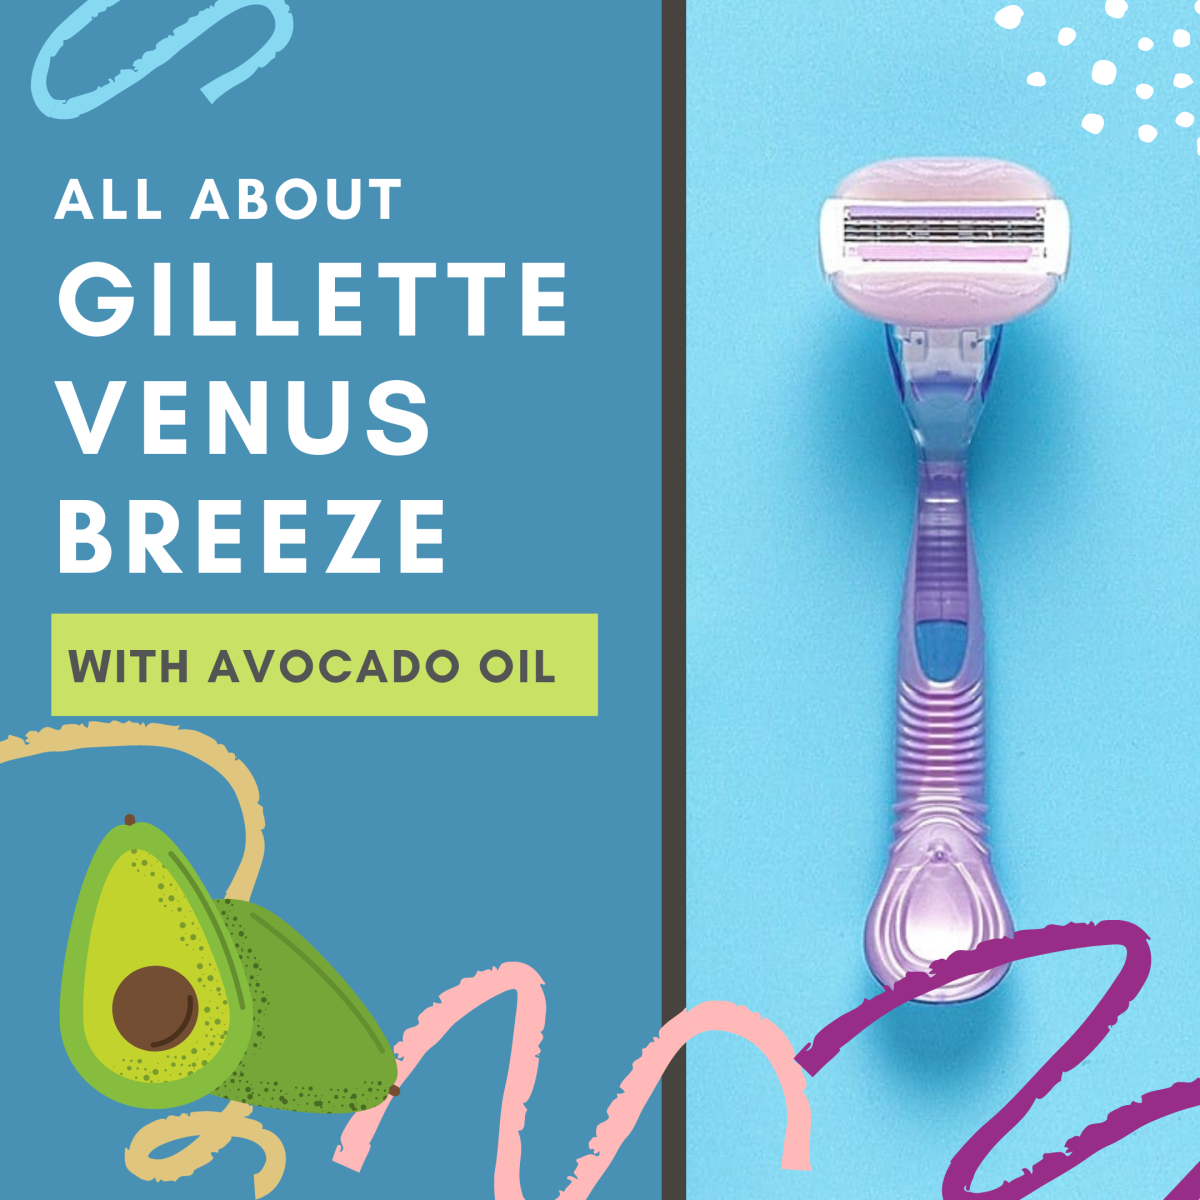 gillette-venus-breeze-razor-with-avocado-oil-for-women-product-review